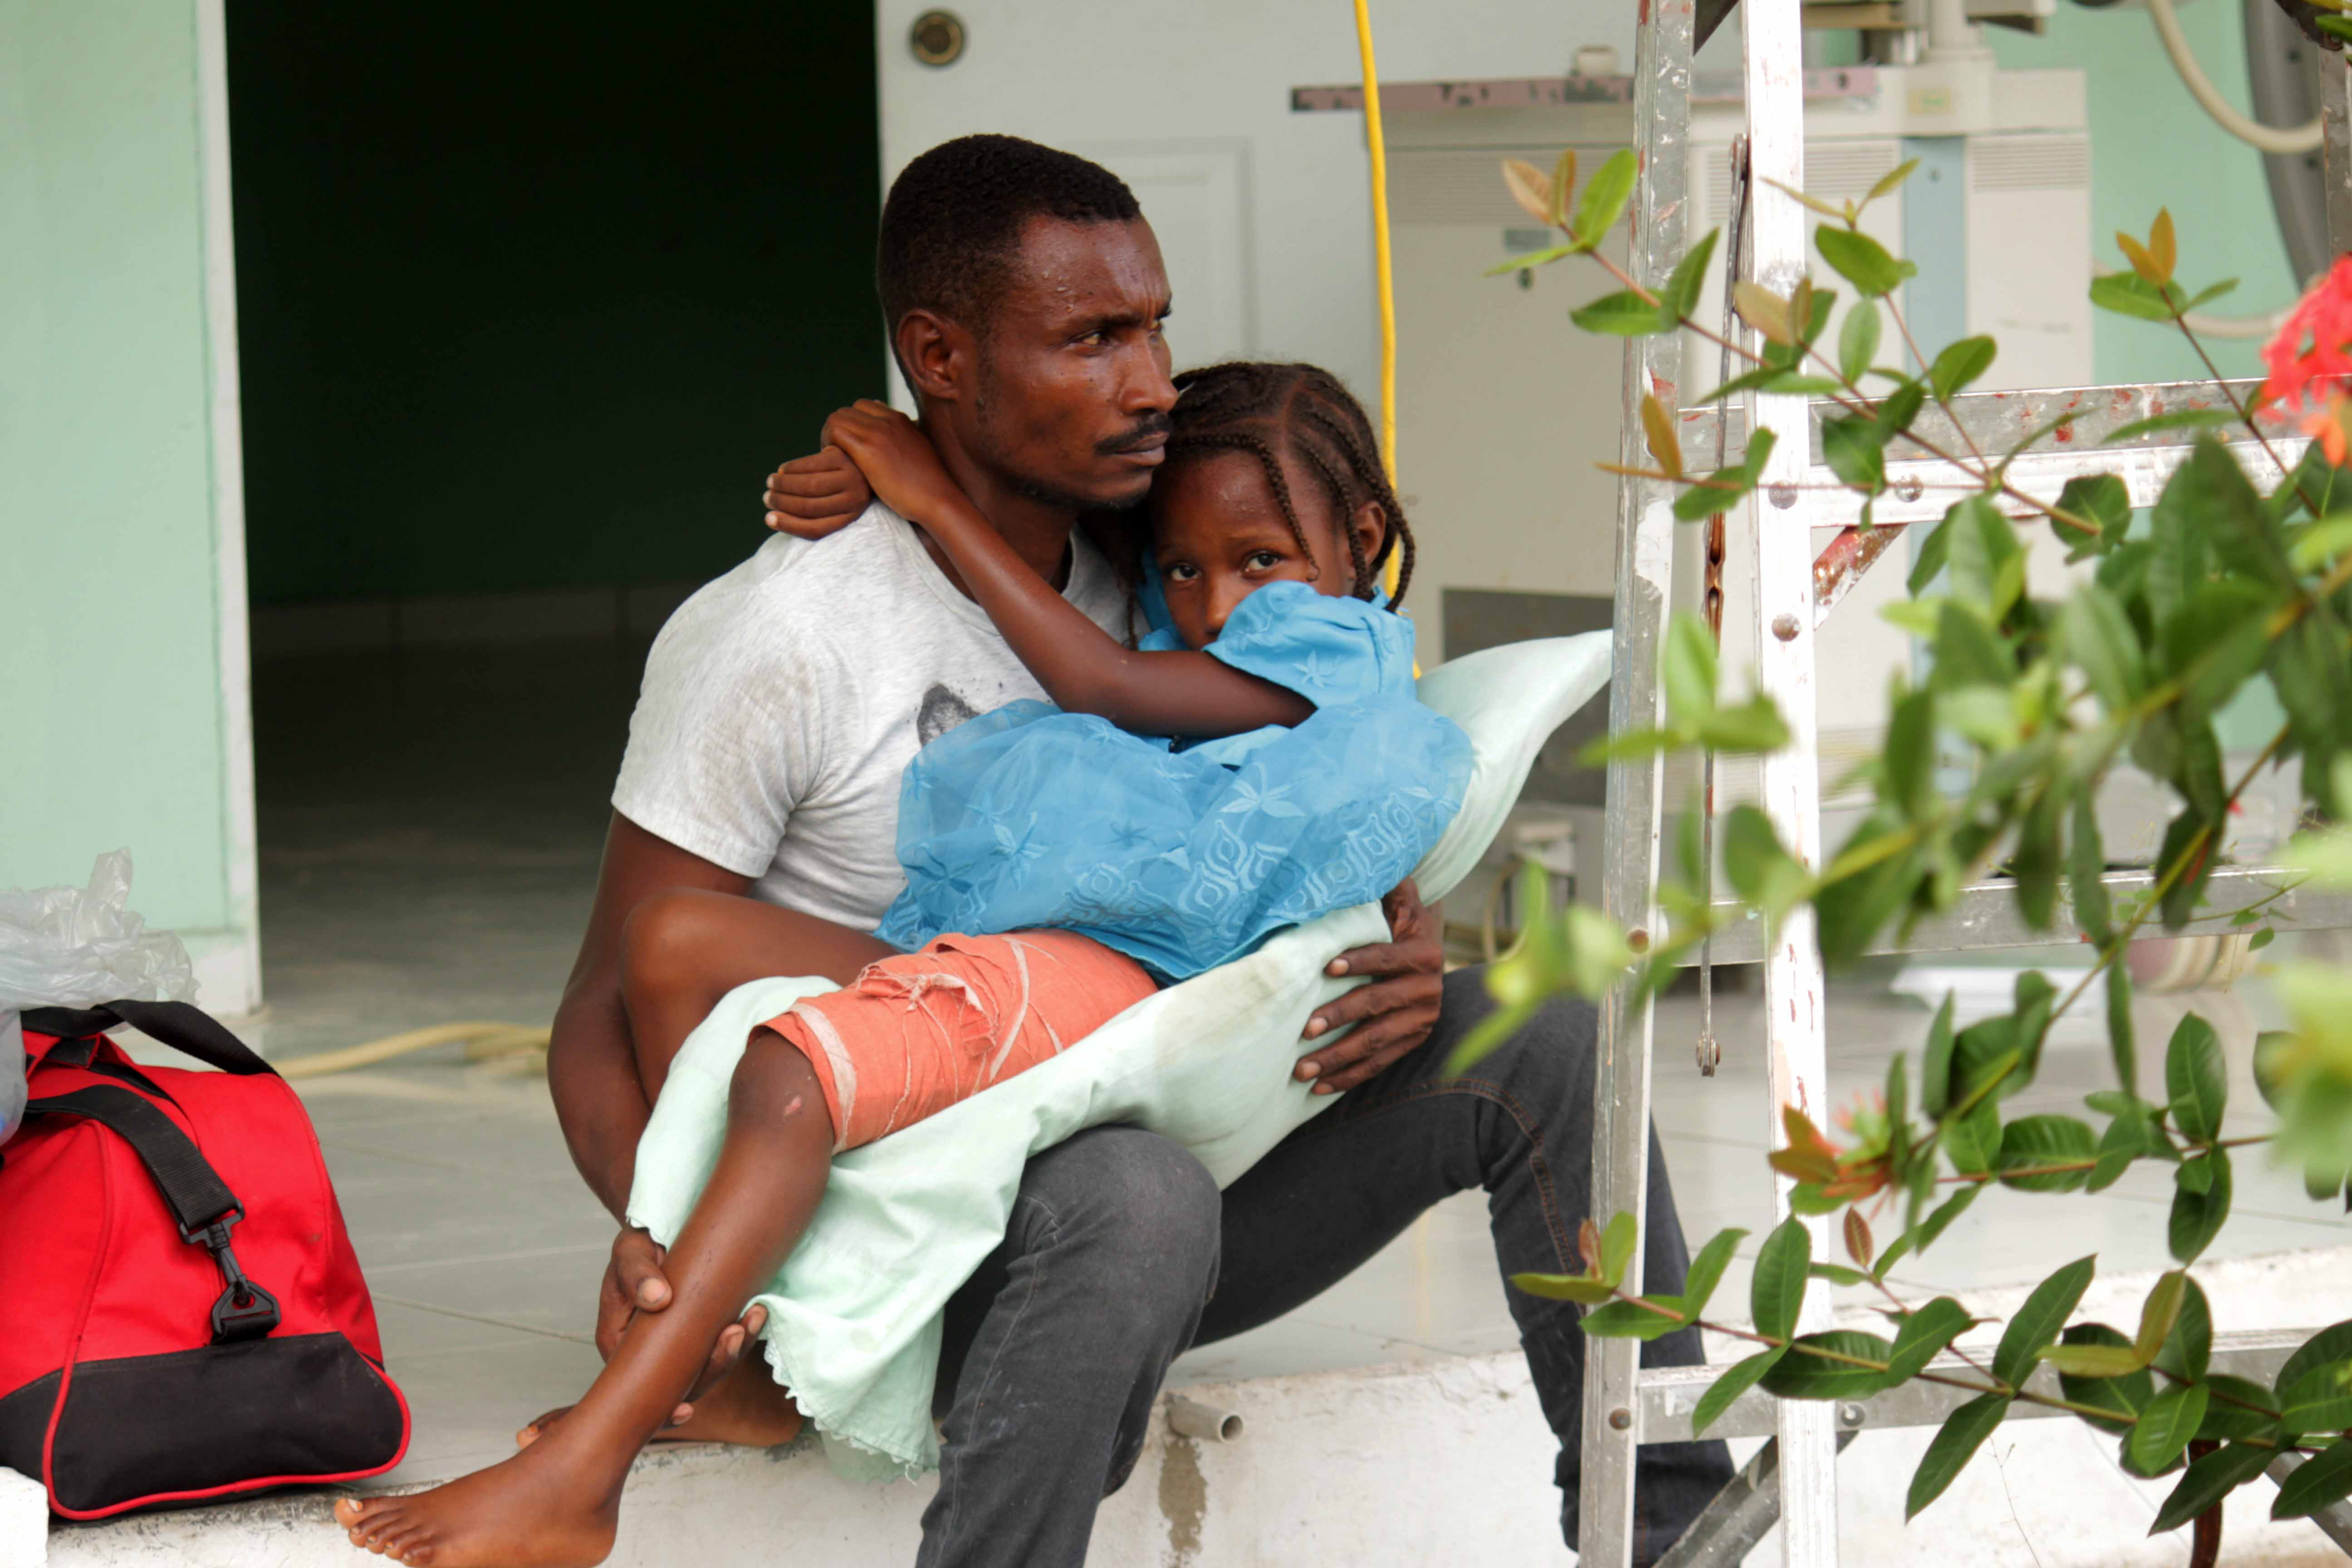 A 6-years-old girl sits with her father while waiting for medical care at the general hospital of Les Cayes, Haiti following the August 2021